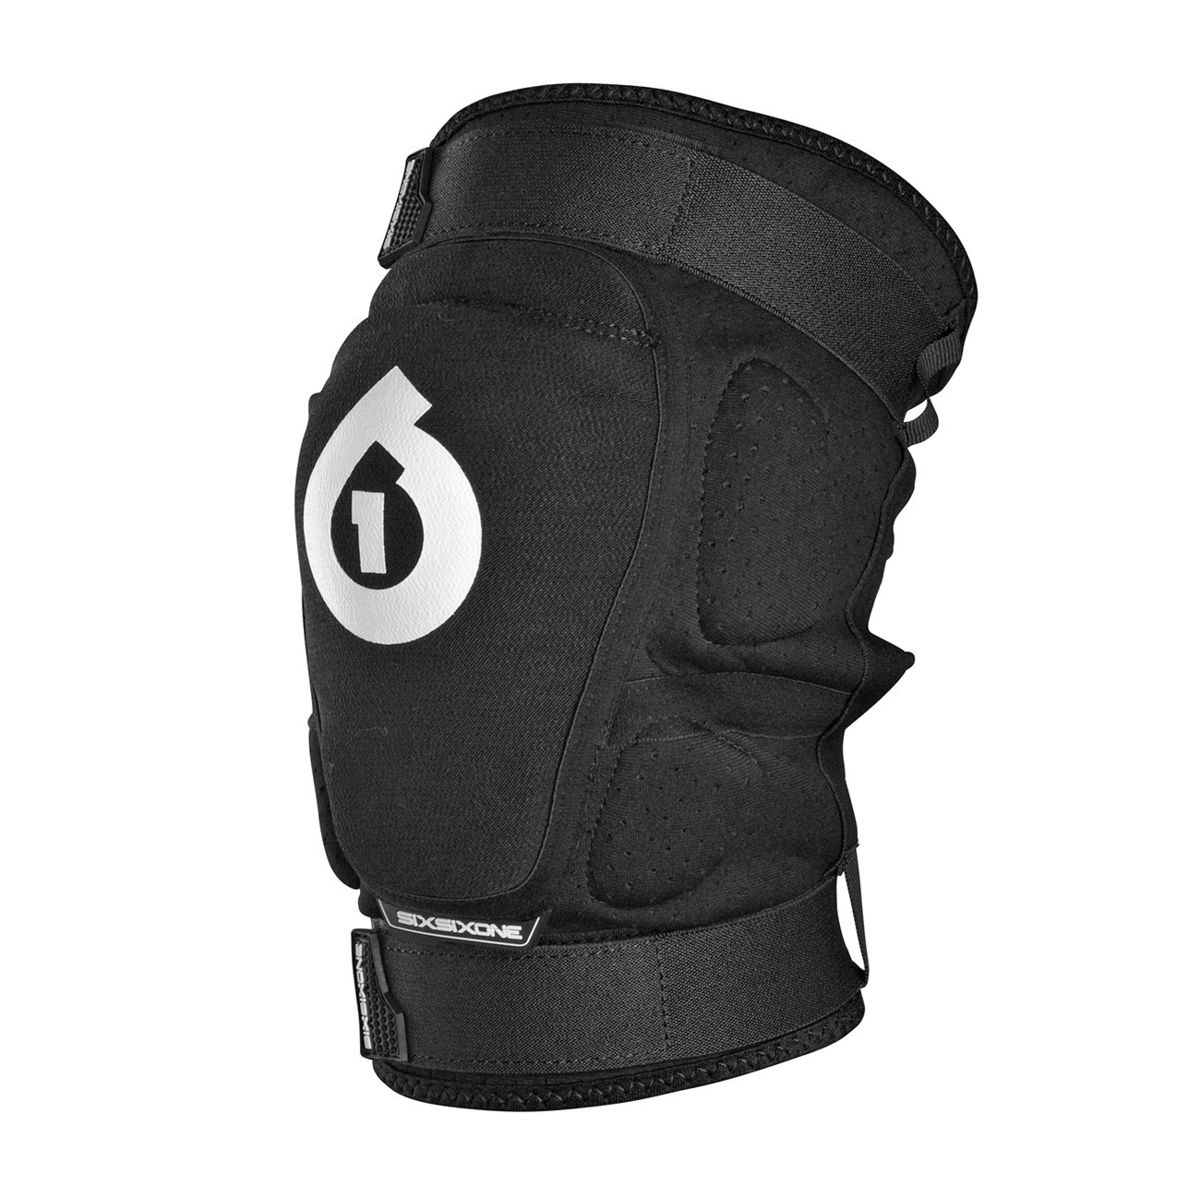 Six Six One Rage Elbow Guards